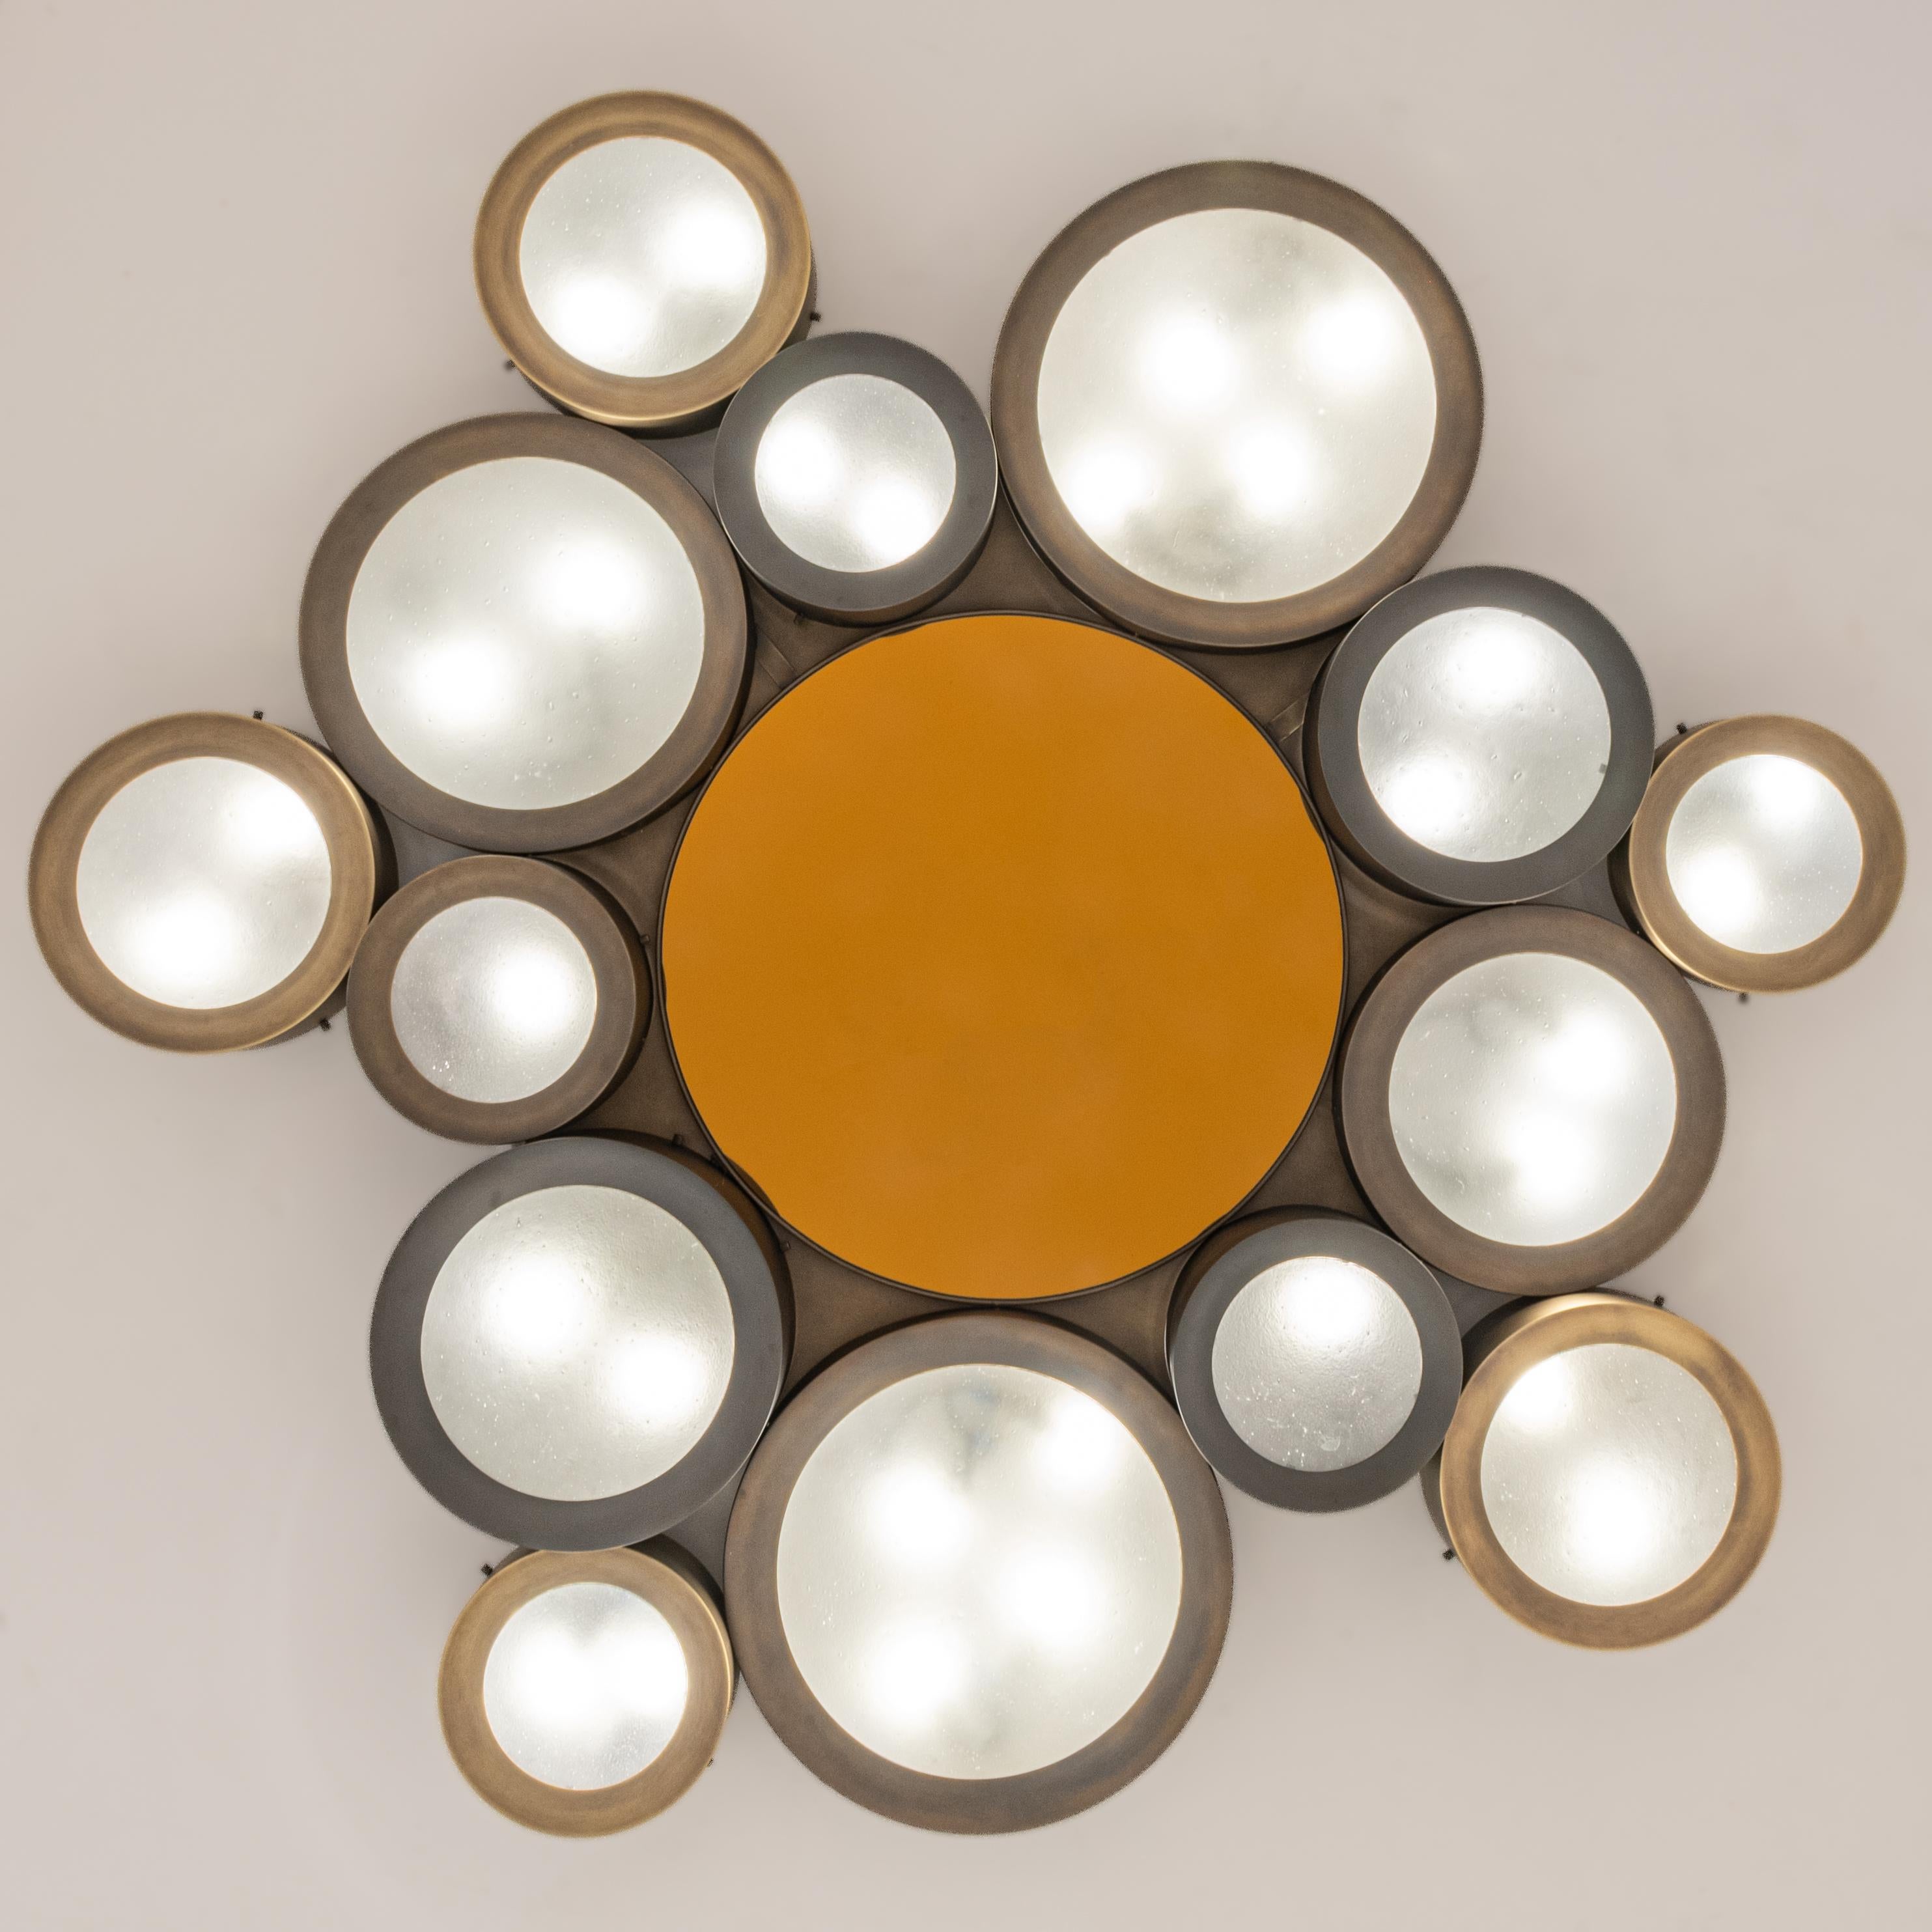 The Helios ceiling light features an imposing composition of illuminated Murano glass shades gravitating around a central tinted mirror. The first images show the fixture in a medley of bronze finishes with an amber center mirror-subsequent pictures